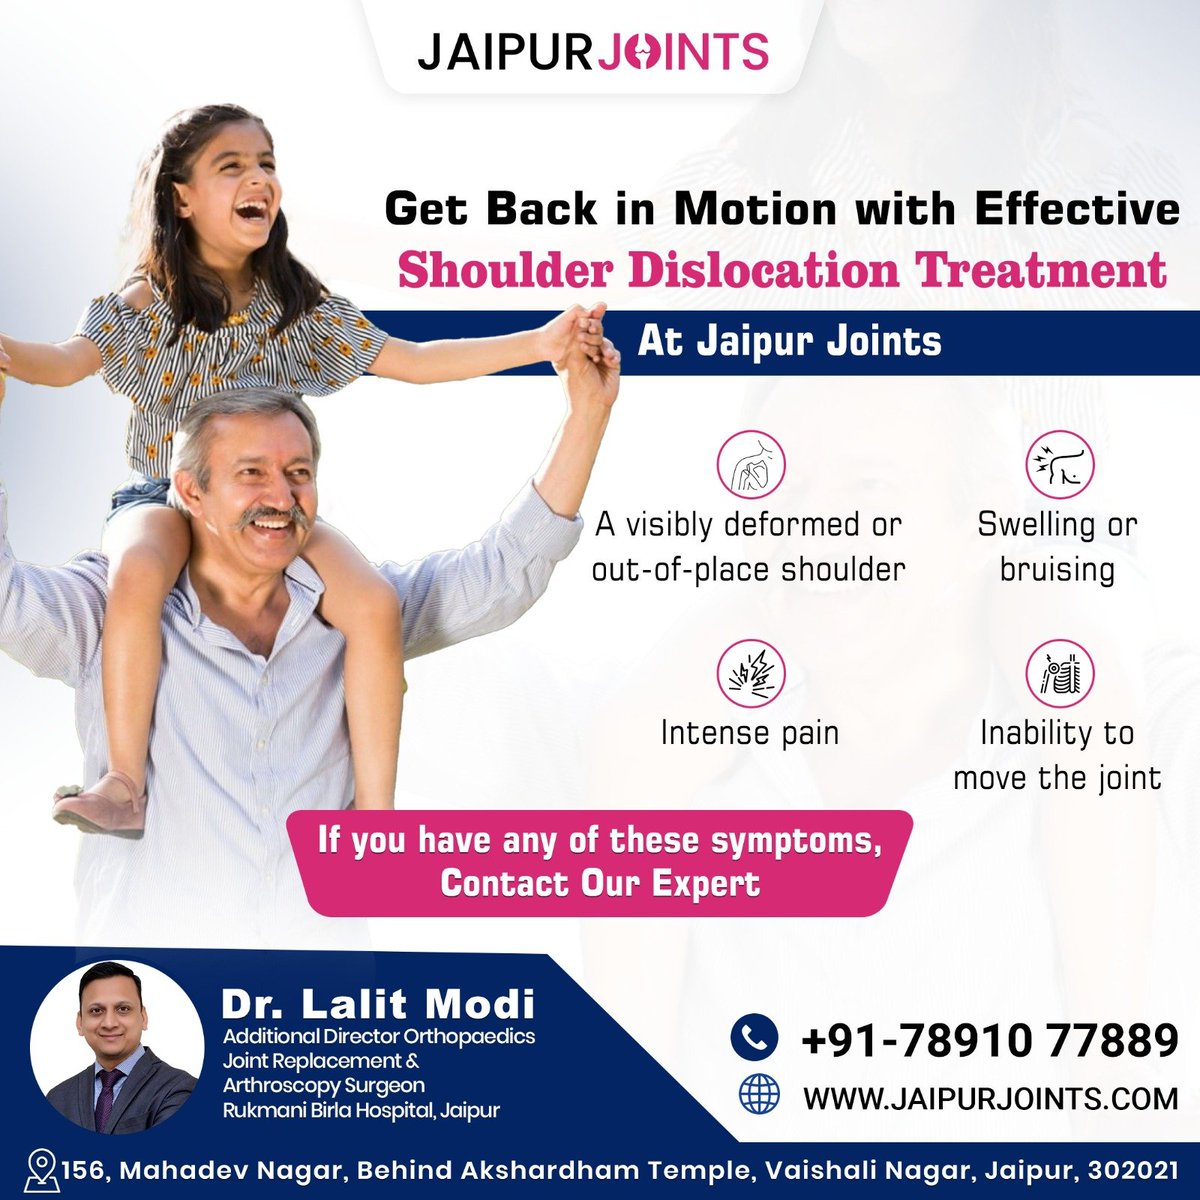 Get Back in Motion With Effective Shoulder Dislocation Treatment At Jaipur Joints.

If you have any of these symptoms, Contact our expert. 7891077889

#Shoulderdislocation #ShoulderArthritis #TendonRepair #RotatorcuffTear #DislocatedShoulder #RotatorCuffTreatment